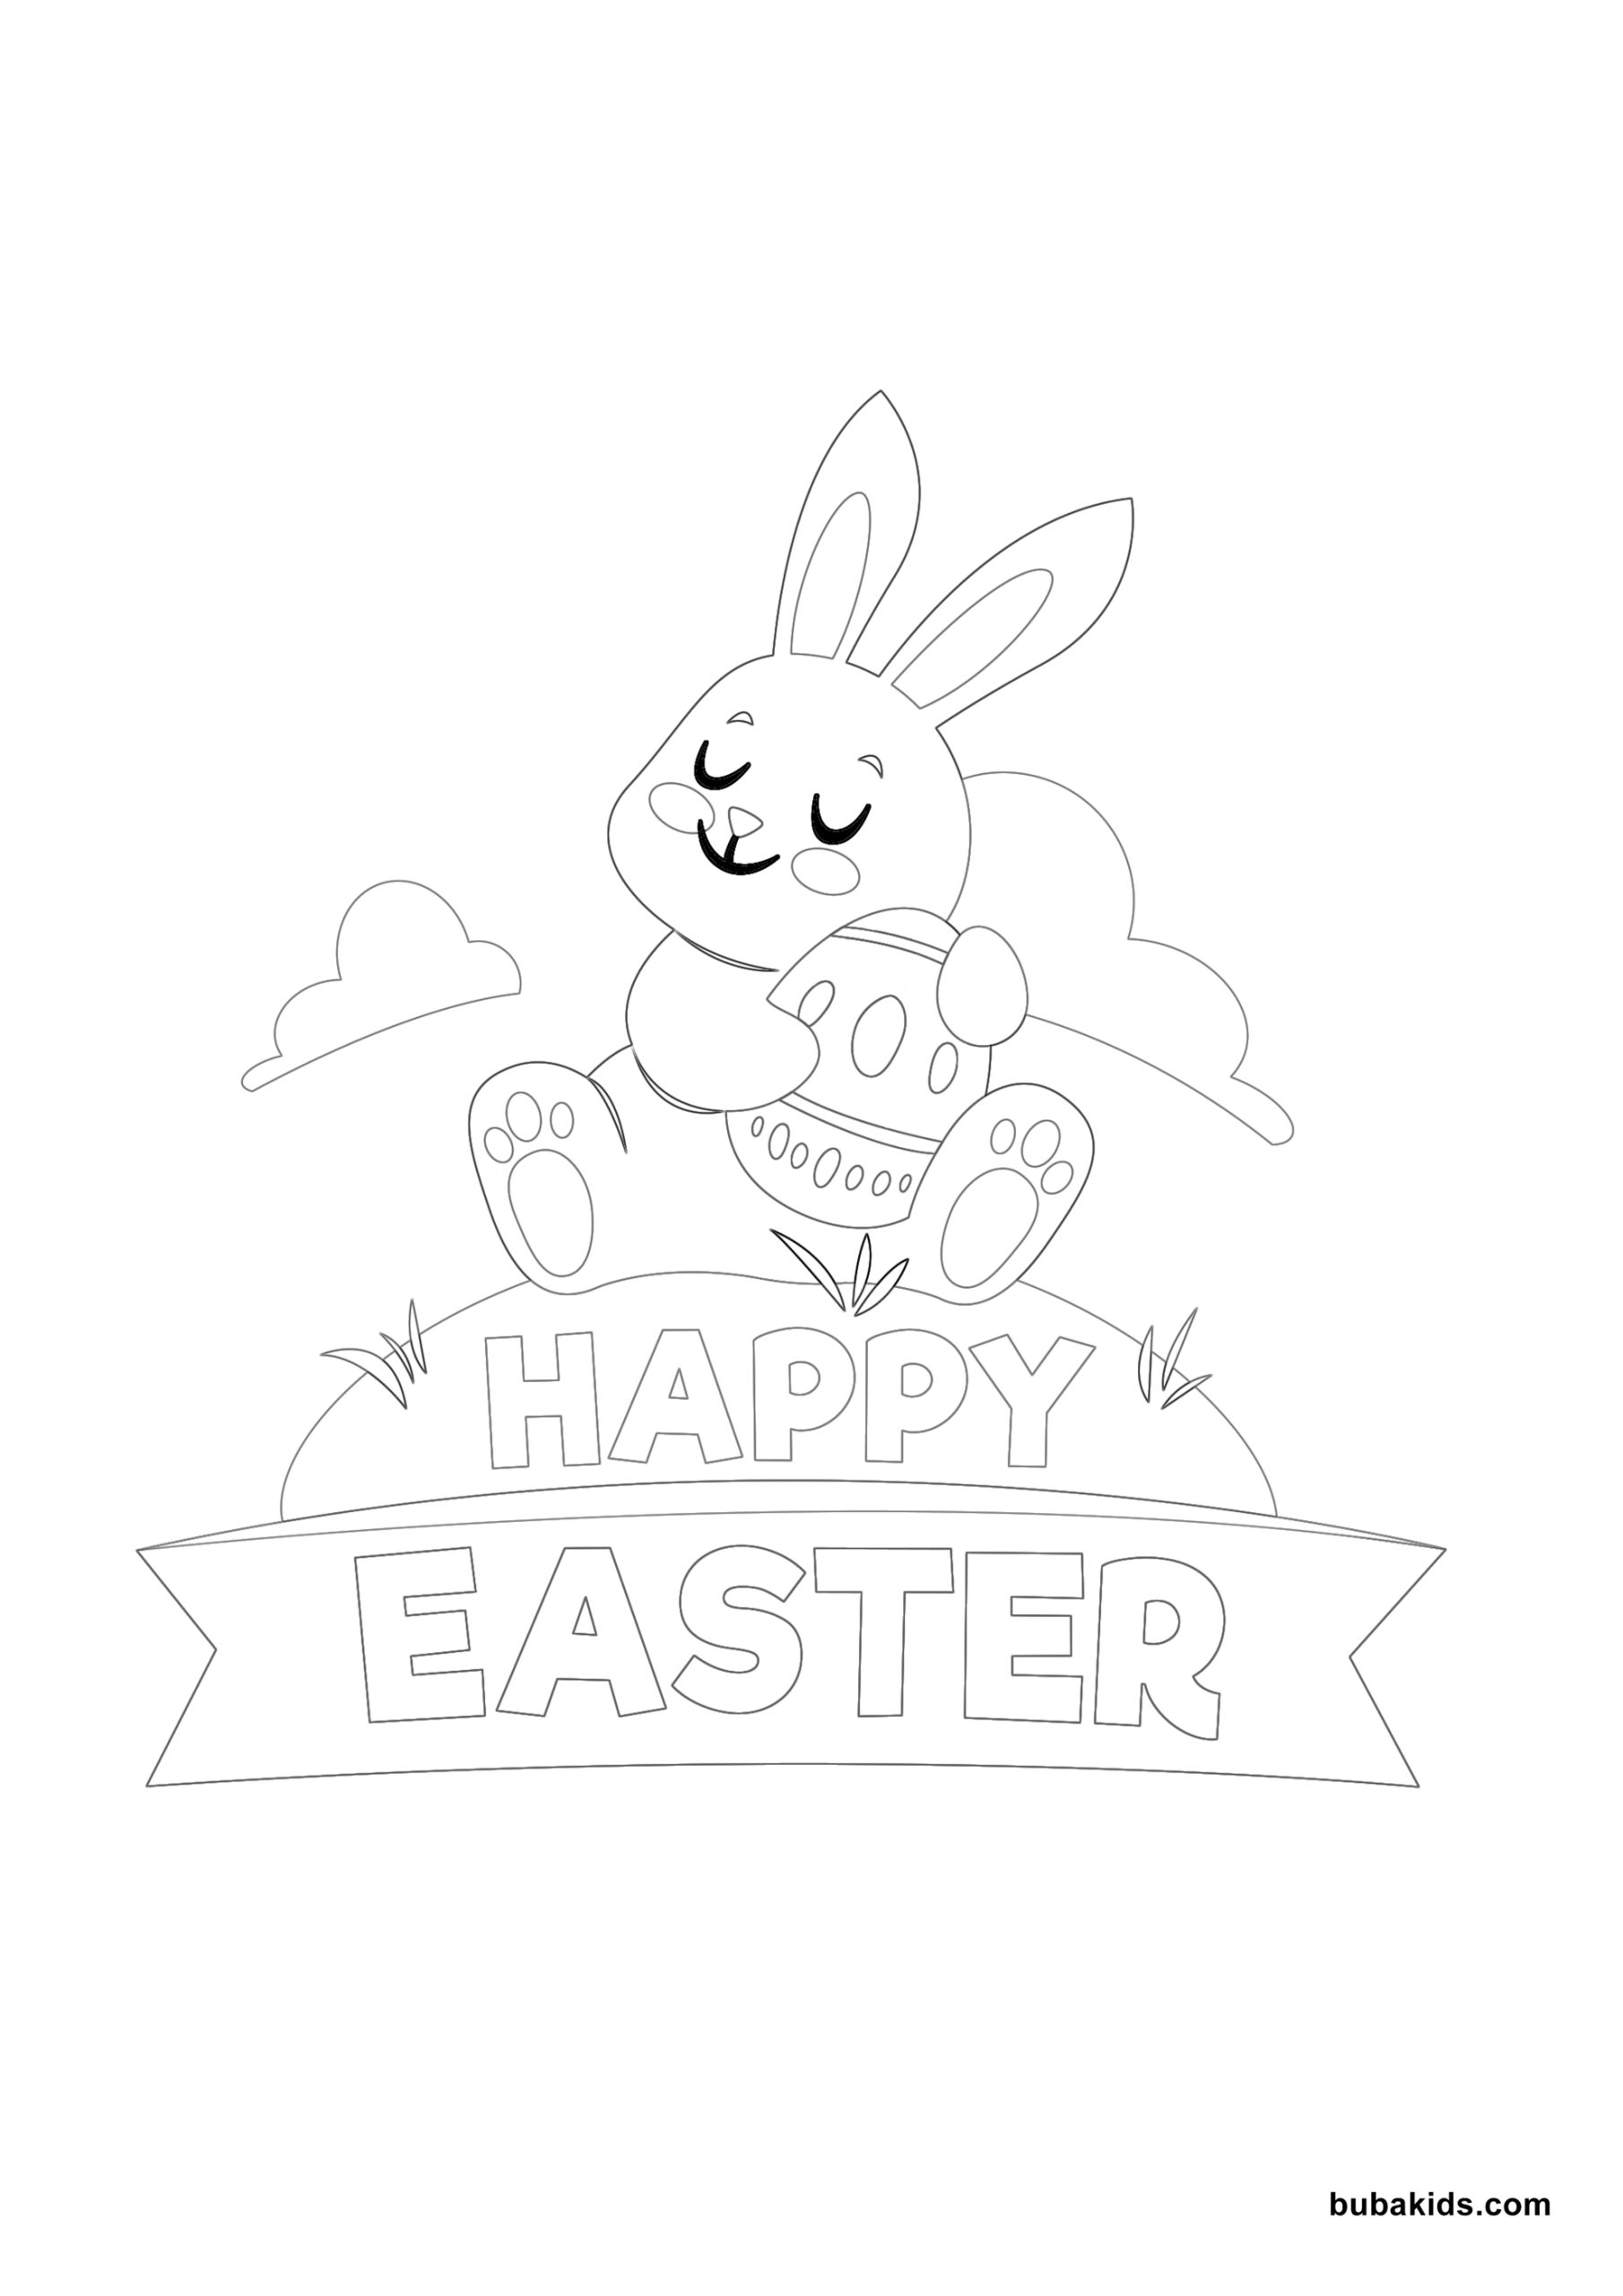 Easter bunny and egg coloring page Wallpaper